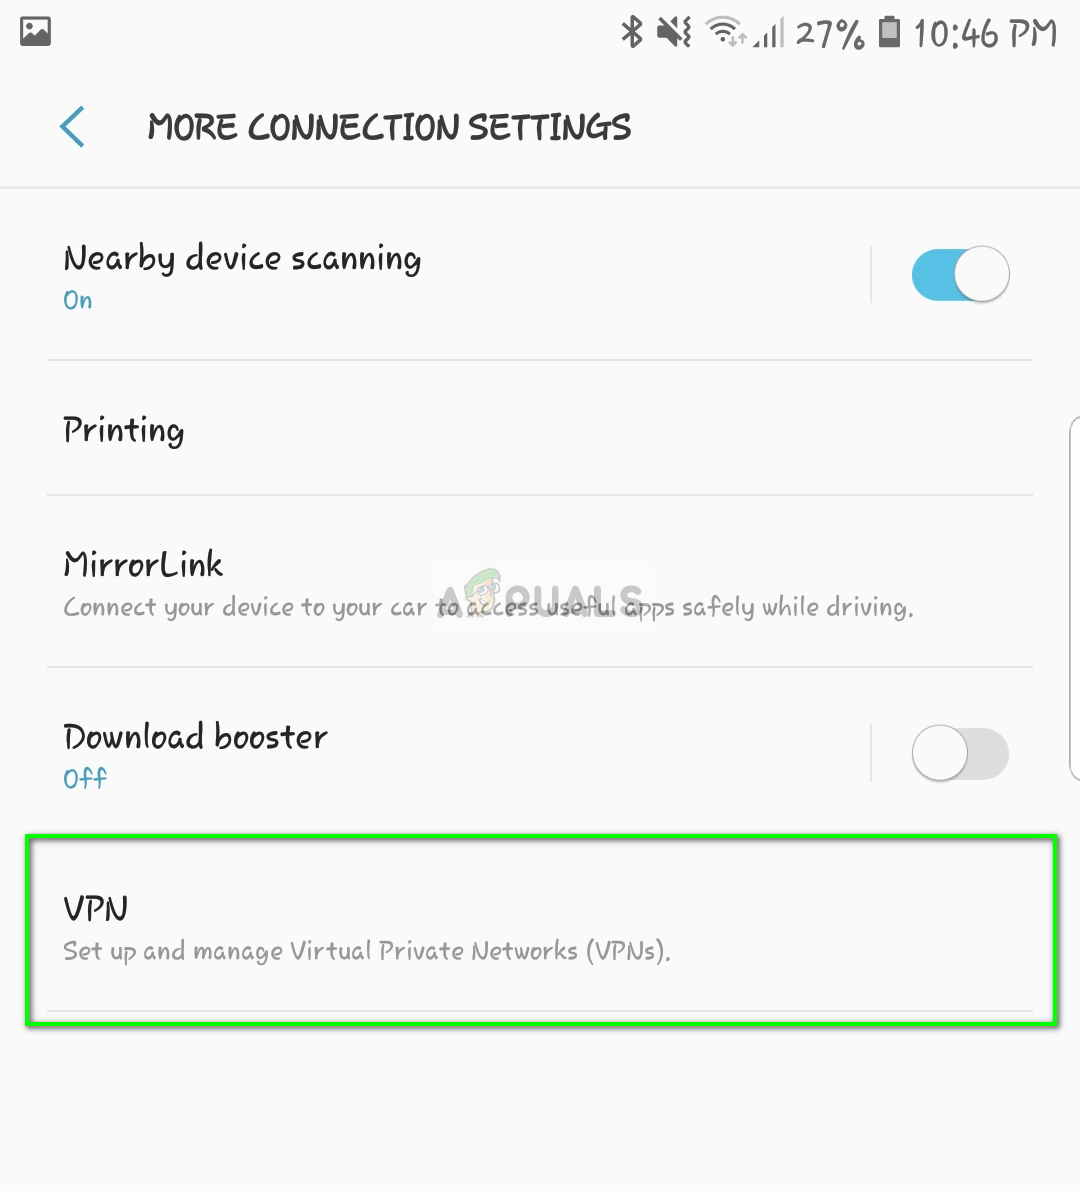 VPN - Connection Settings in Android